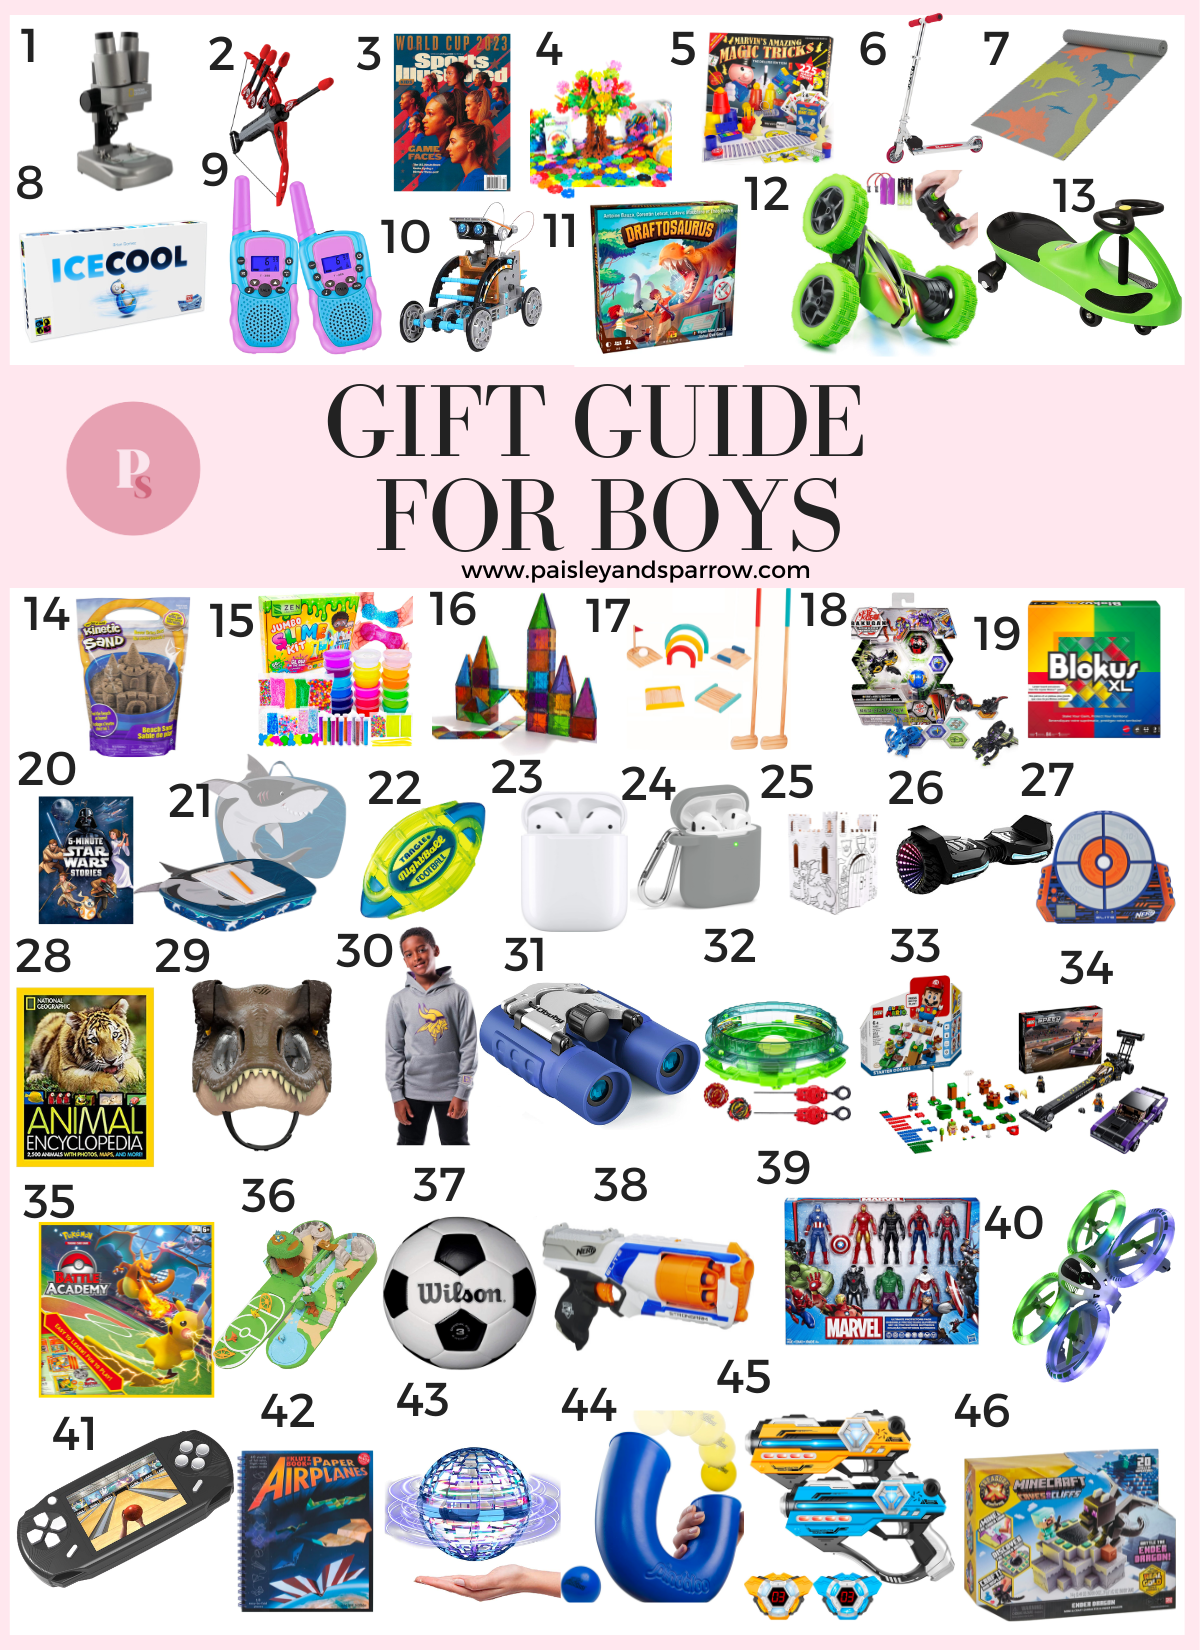 40 Best Gifts for 10 Year Old Boys - Play Party Plan